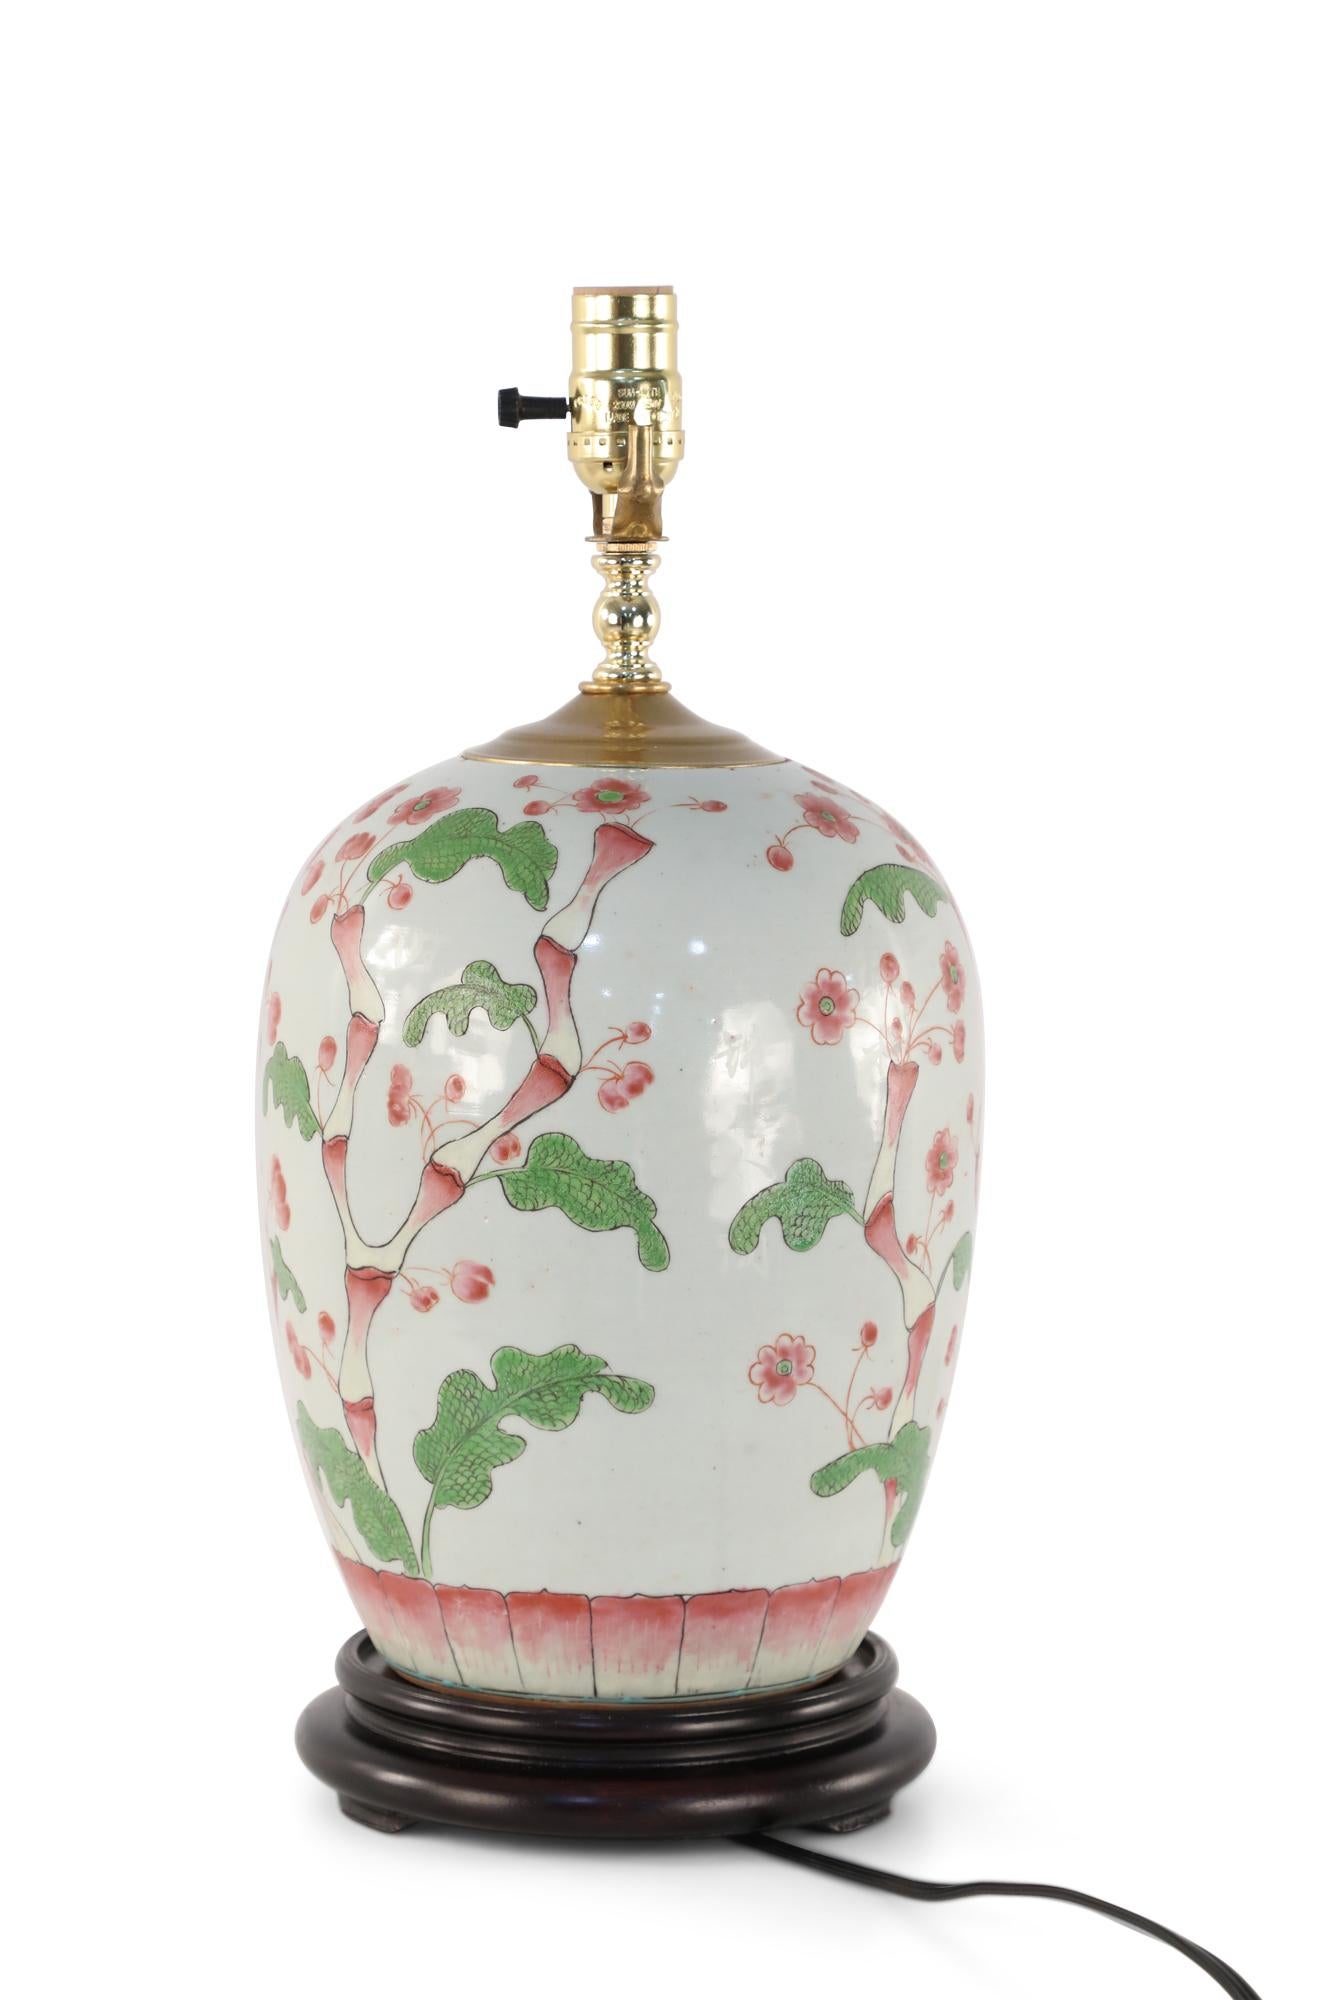 Chinese off-white porcelain table lamp made from a bulbous vase with a budding green and pink cherry blossom tree growing up its form, a wooden base, and brass hardware.